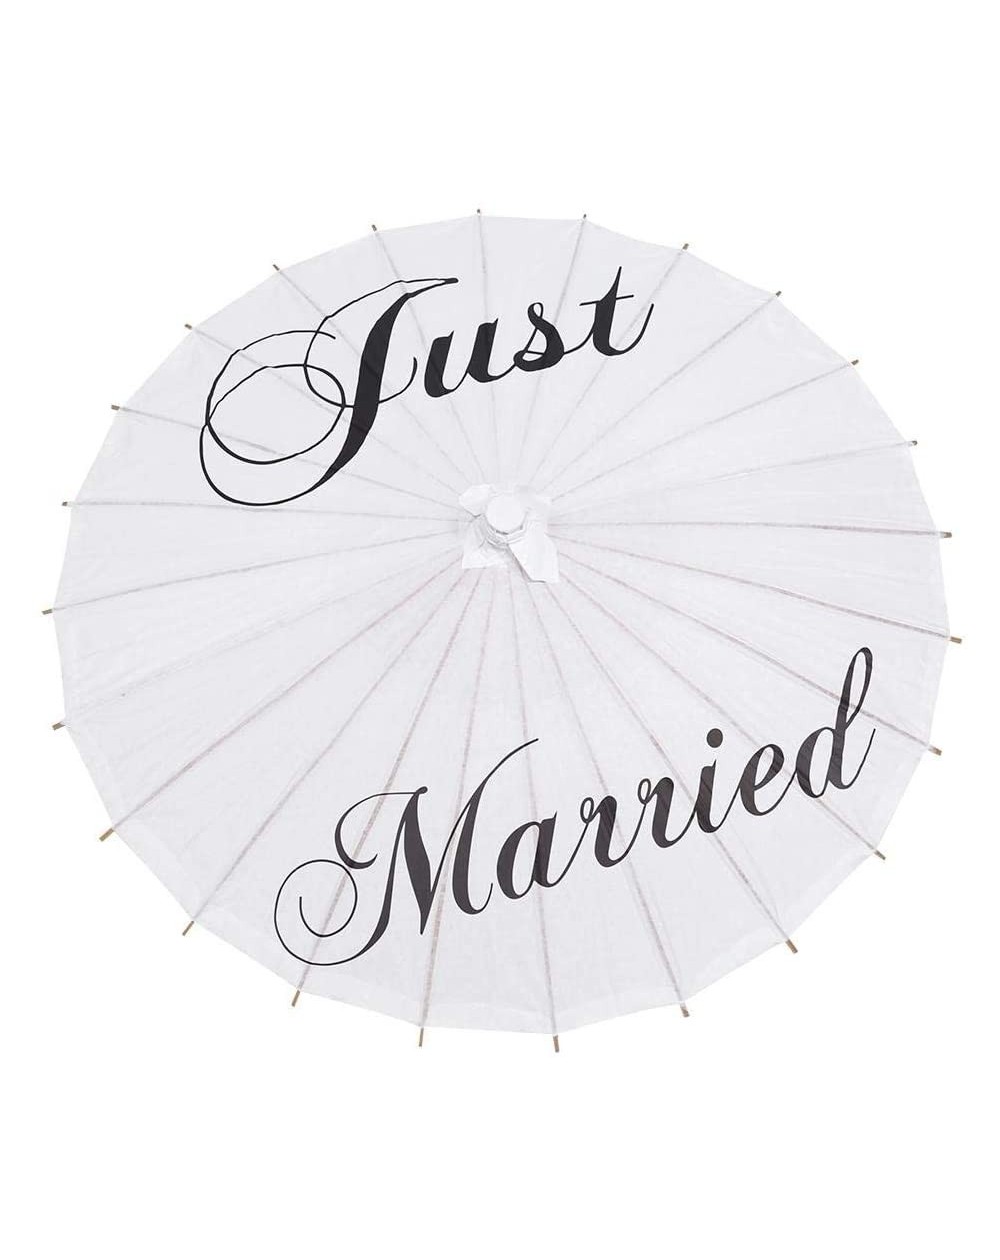 Favors Paper Umbrella- White Paper Umbrella for Wedding Party Bridal Decorations Photography Art Display 59cm / 23.2inch(Just...